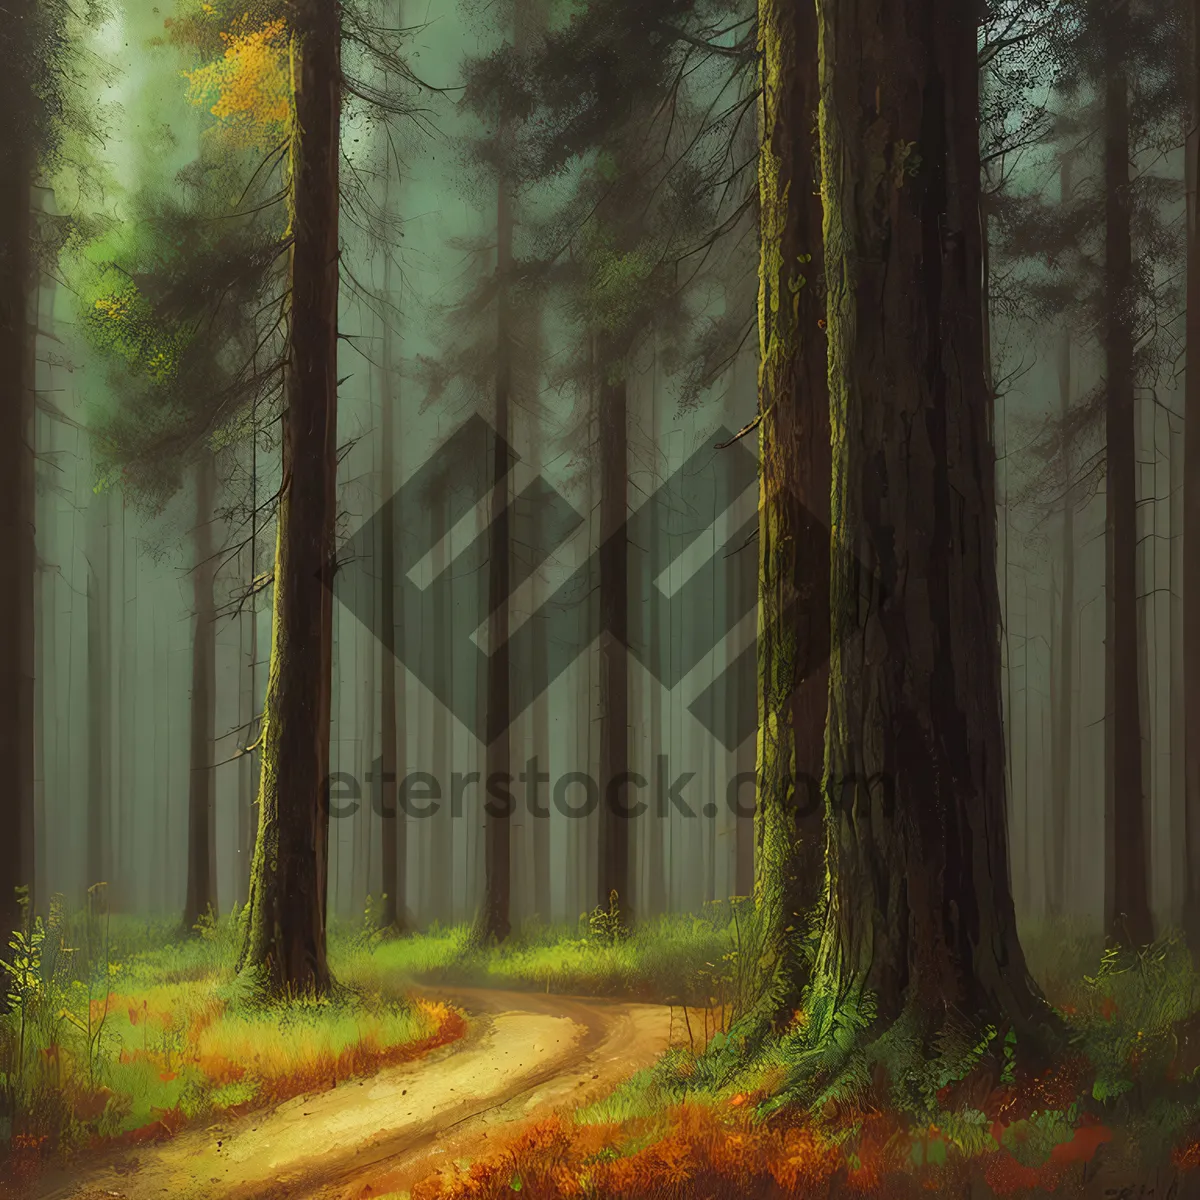 Picture of Misty Morning Path in Autumn Forest